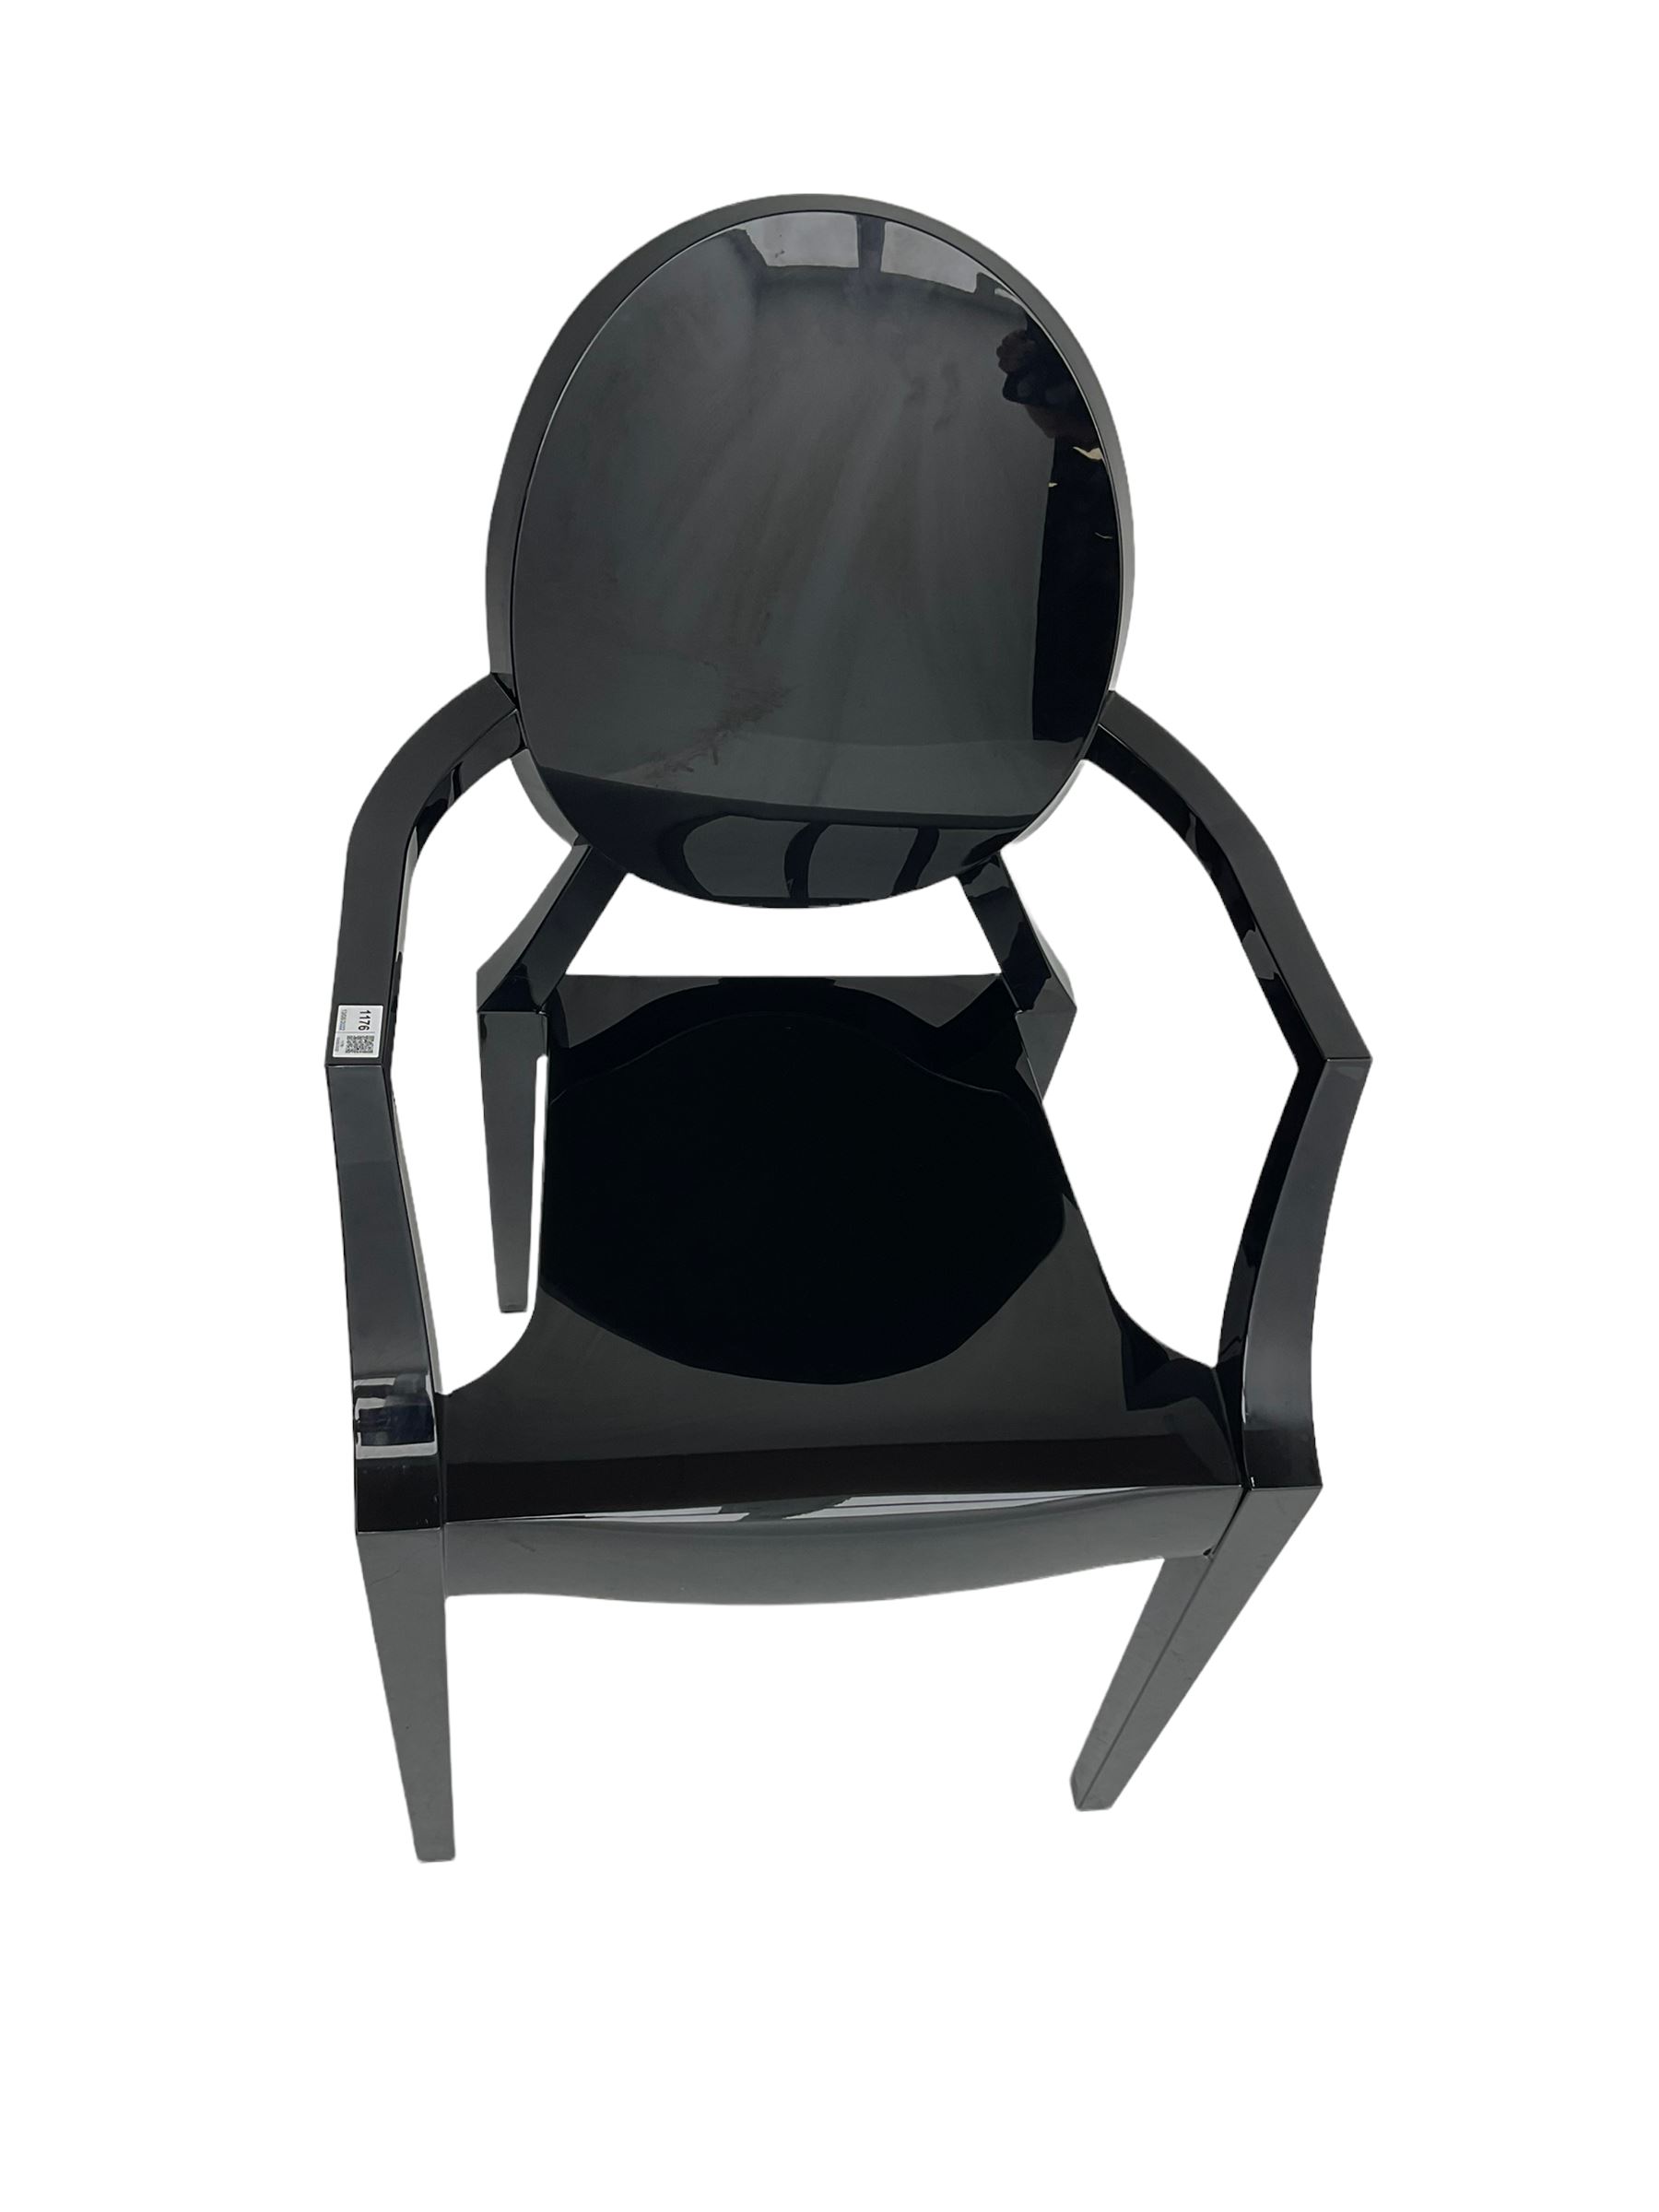 Philippe Starck for Kartell - 'Louis Ghost' chair - Image 2 of 6